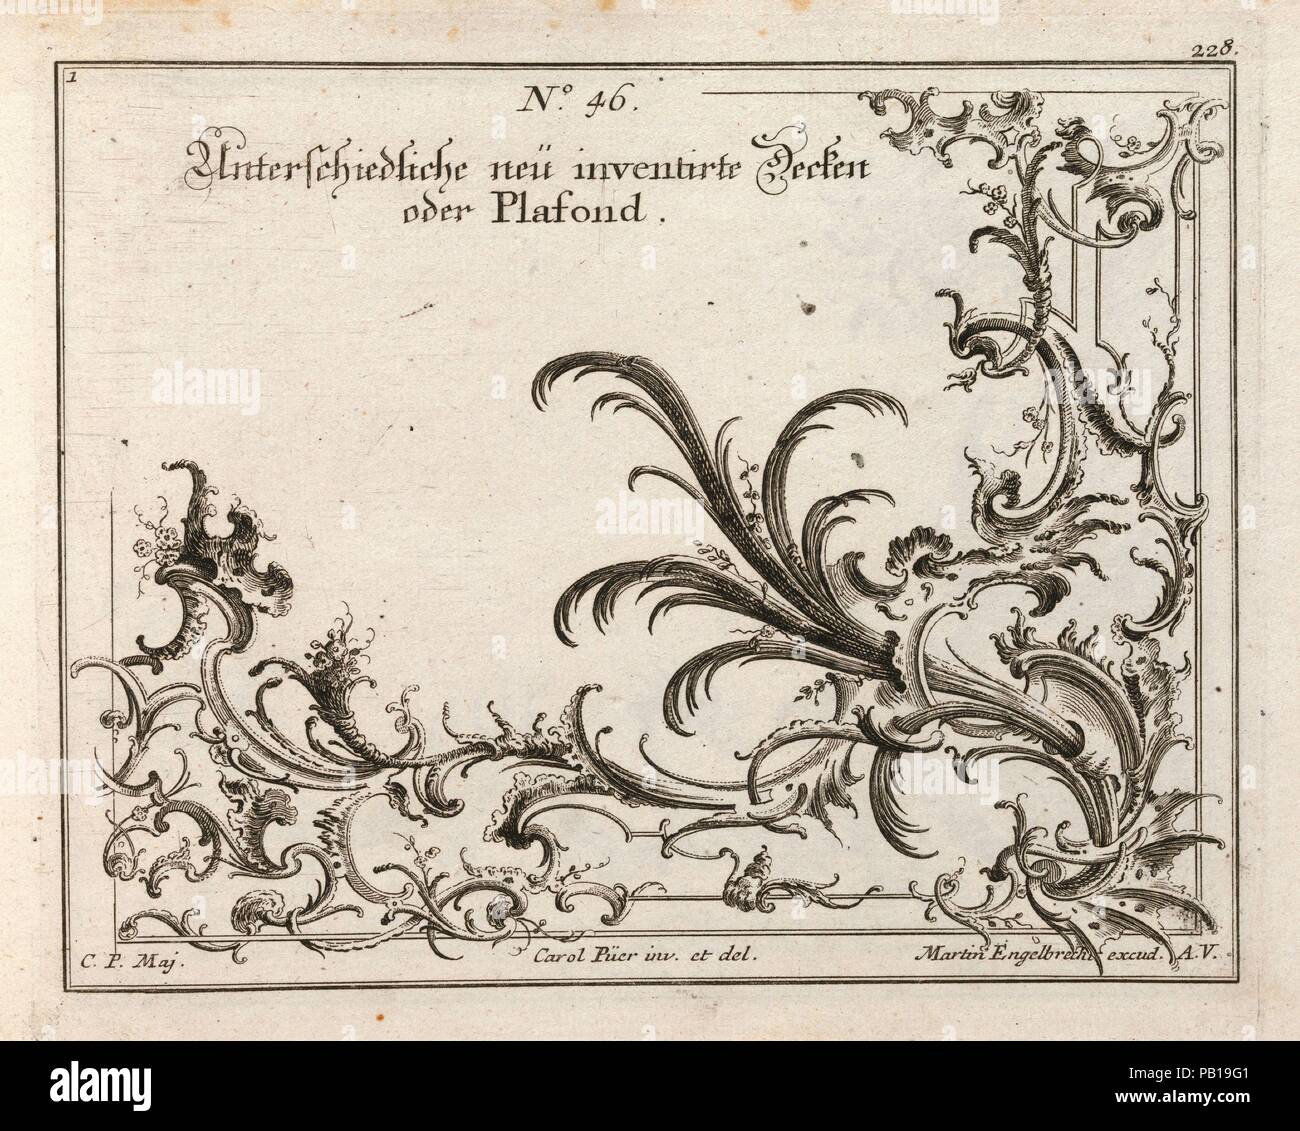 Design for the Decoration of the Lower Right Corner of a Ceiling, Plate 1 from: 'Unterschiedliche neü inventirte Decken oder Plafond.'. Artist: Carl Pier (German, active Augsburg, ca. 1750). Dimensions: Overall: 8 7/16 × 13 3/4 in. (21.5 × 35 cm). Publisher: Martin Engelbrecht (German, Augsburg 1684-1756 Augsburg). Date: Printed ca. 1750-56.  Ornament print with a design for the decoration of the lower right corner of a ceiling with thin elegant rocaille motifs and the offshoot of a plant in the corner. This print is bound in an album containing 27 series with a total of 122 ornament prints fr Stock Photo